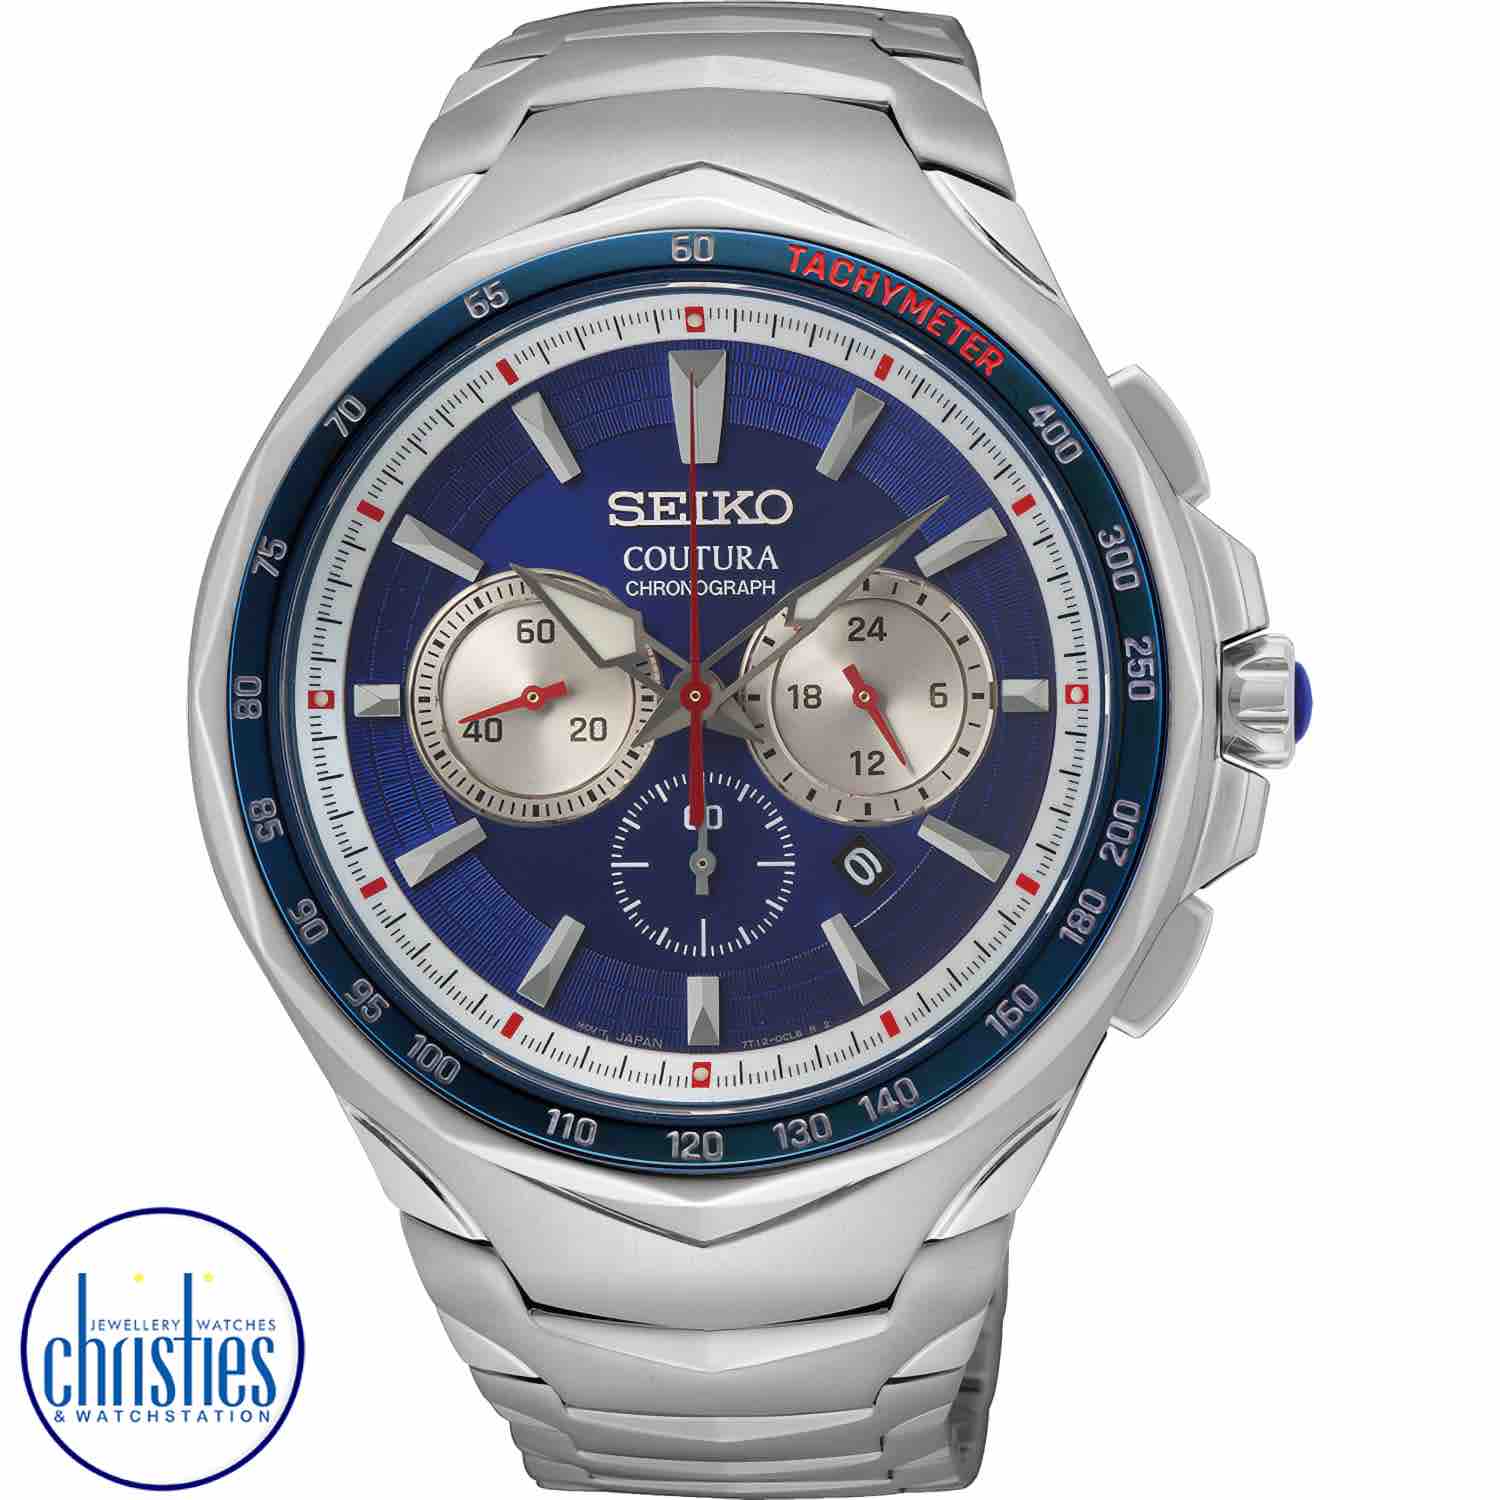 SRWZ21P-9 Seiko Coutura Chronograph Watch. This  Seiko Coutura Chronograph features a metallic blue dial with silver toned markers and highlights with ‘LumiBrite’ luminescent hands as well as red highlights.